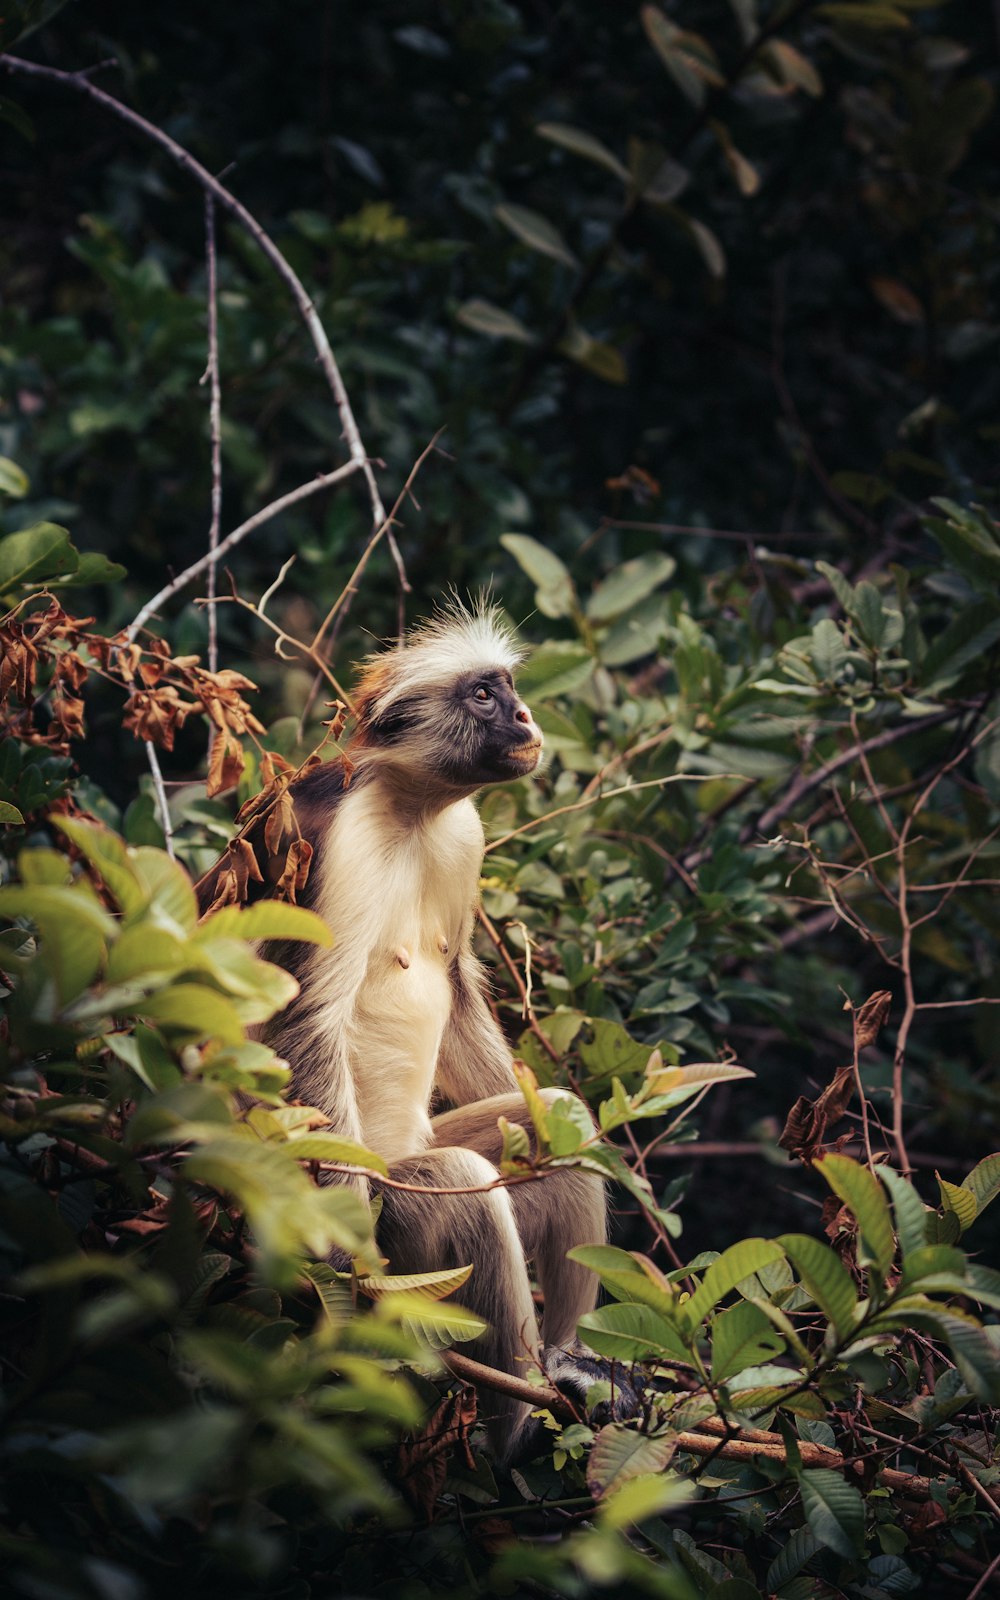 a monkey sitting on a tree branch in a forest